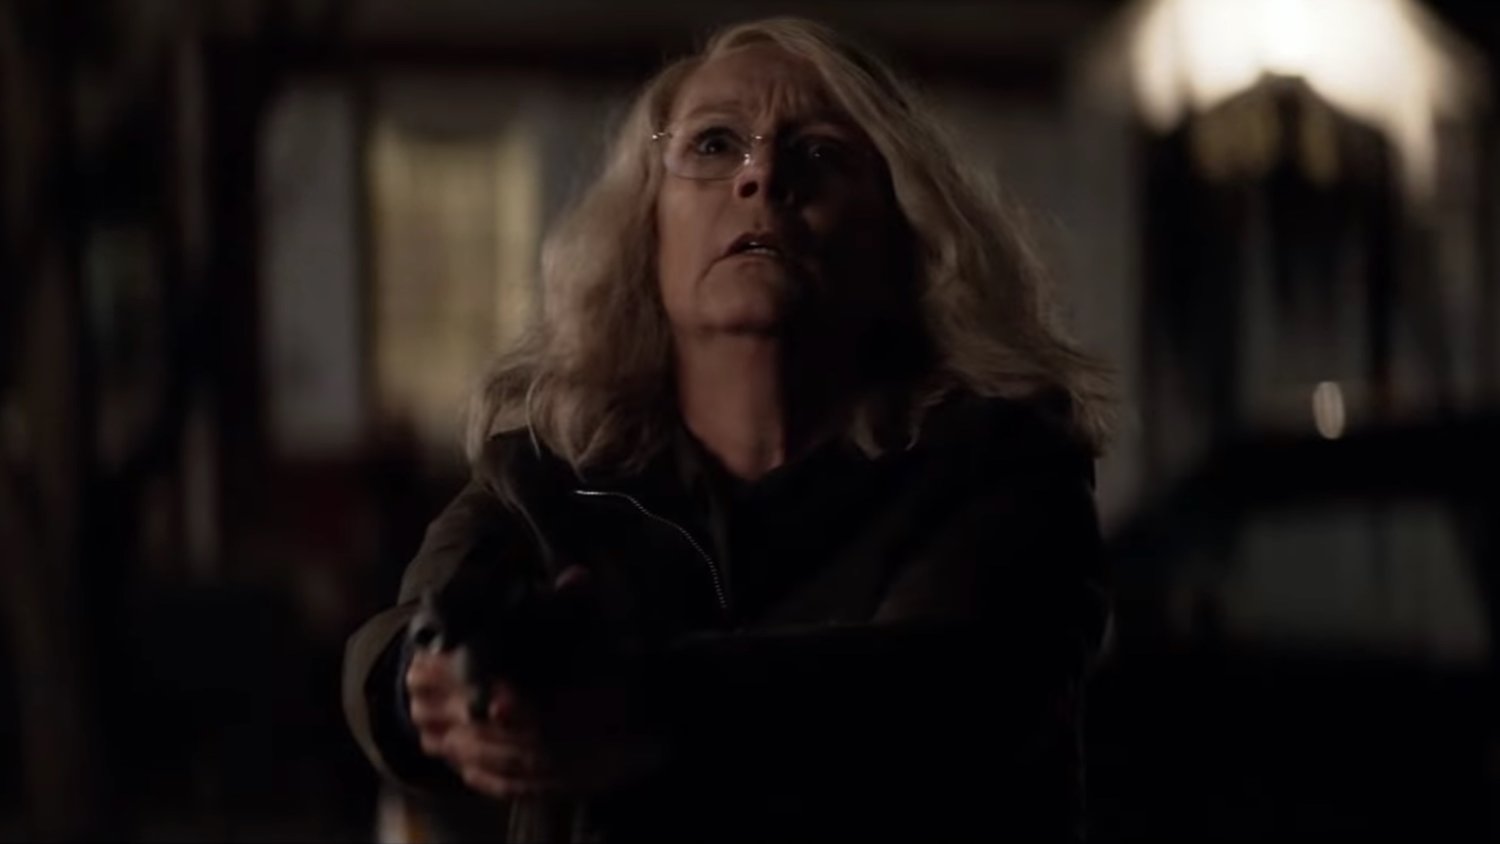 Jamie Lee Curtis Explains How Laurie Strode is Like Dr. Loomis in The New HALLOWEEN Film